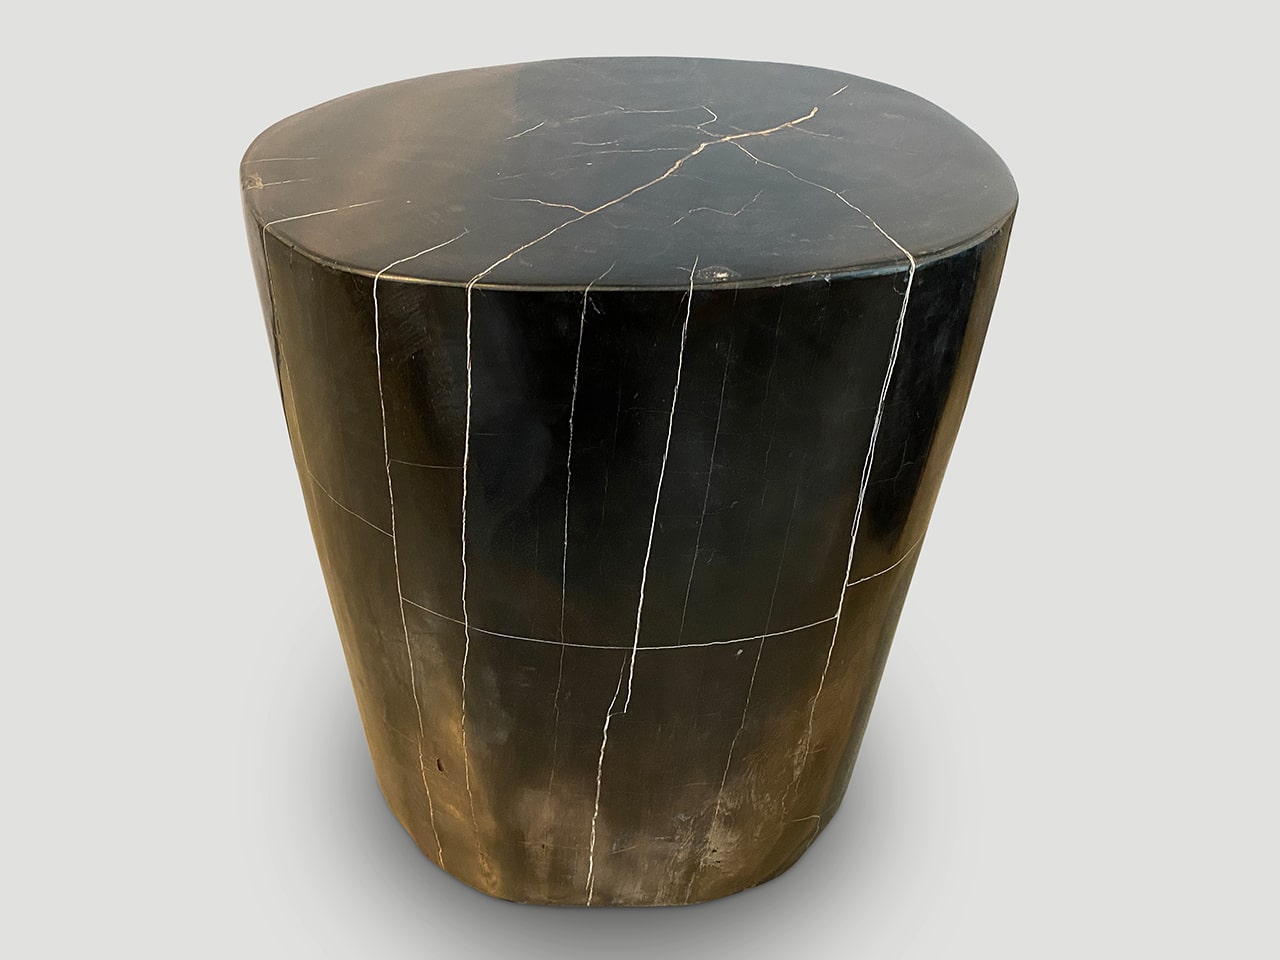 SUPER SMOOTH HIGH QUALITY PETRIFIED WOOD SIDE TABLE